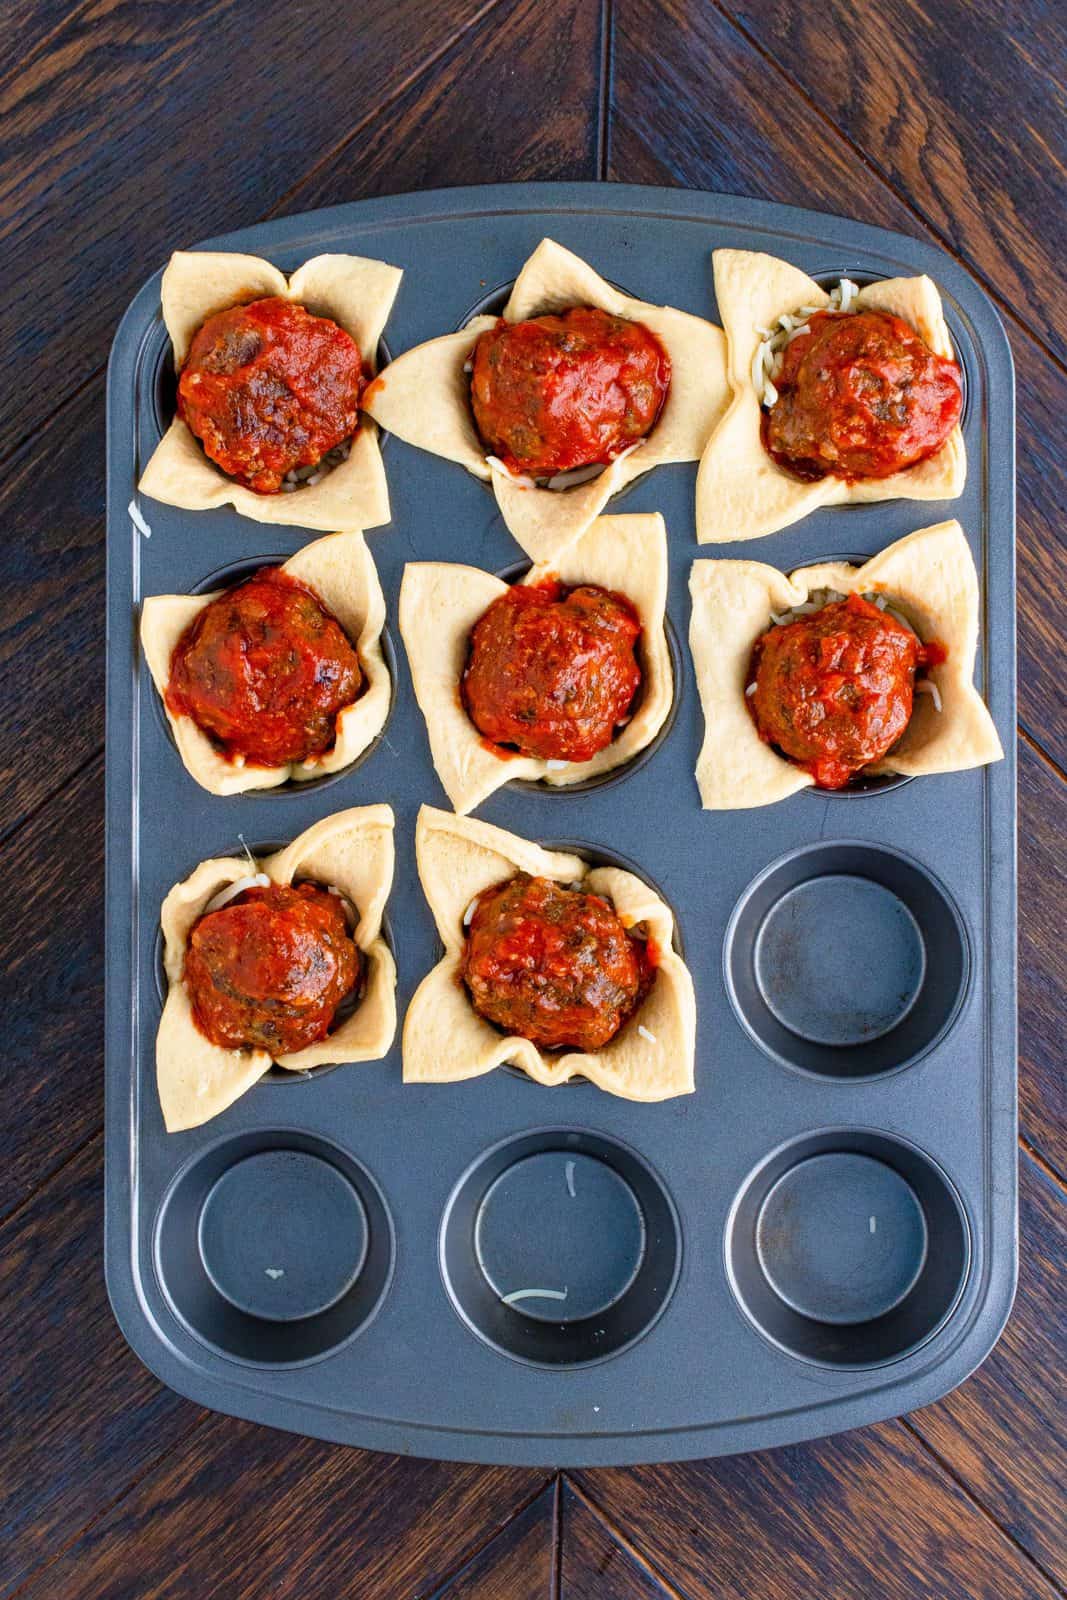 Meatballs added to top of cheese in muffin tin.